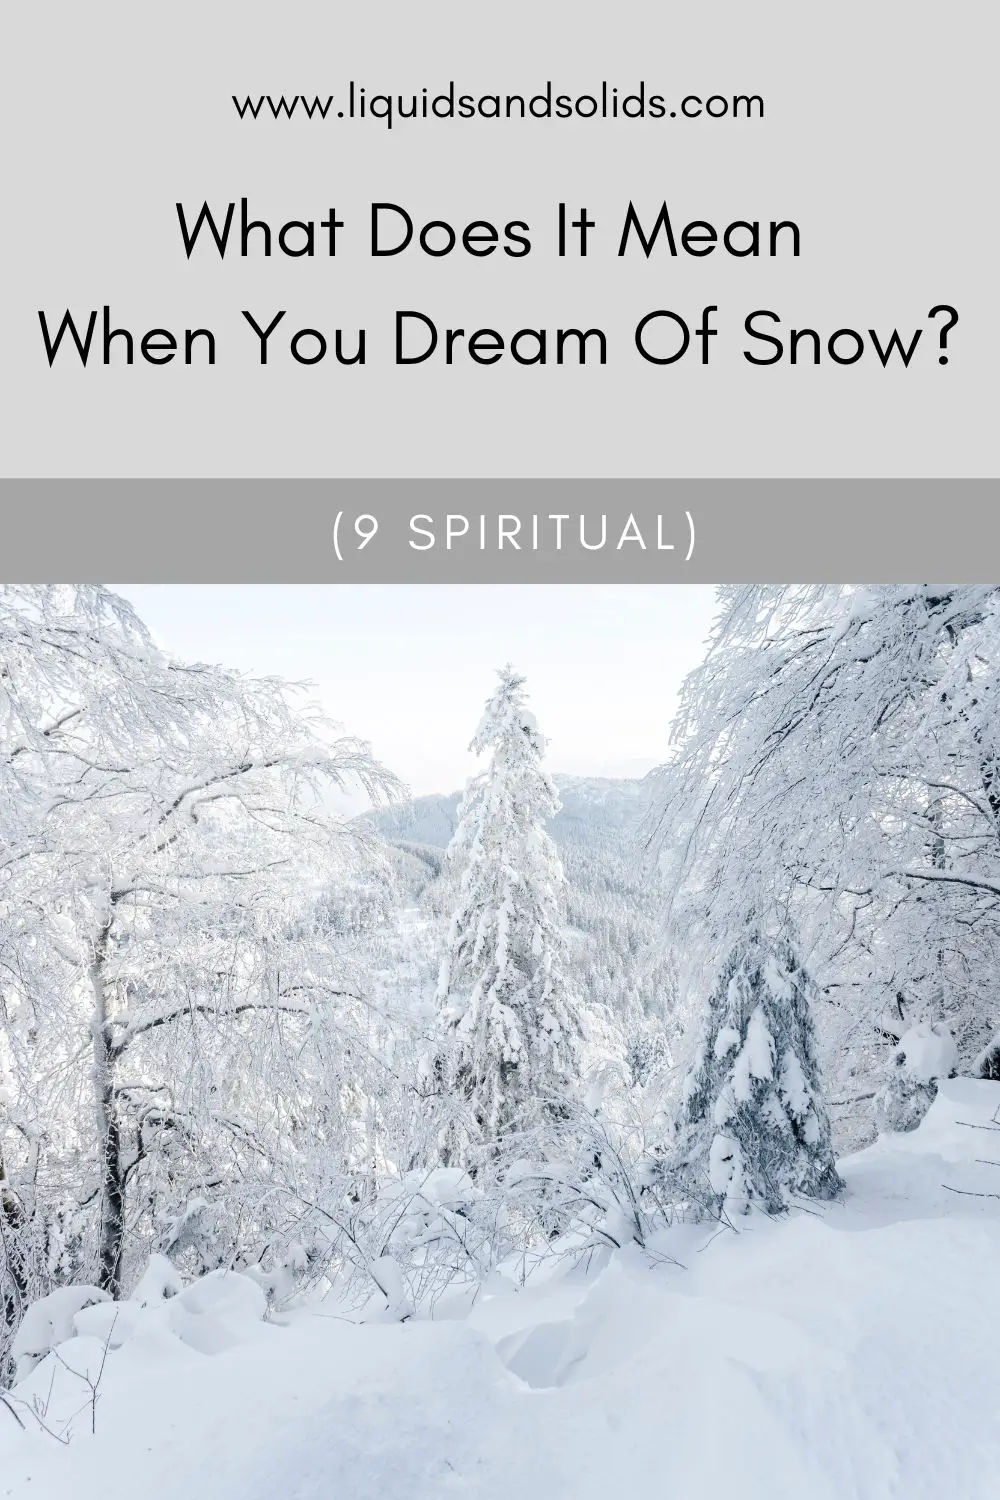 What Does It Mean To Dream Of Driving In Snow?